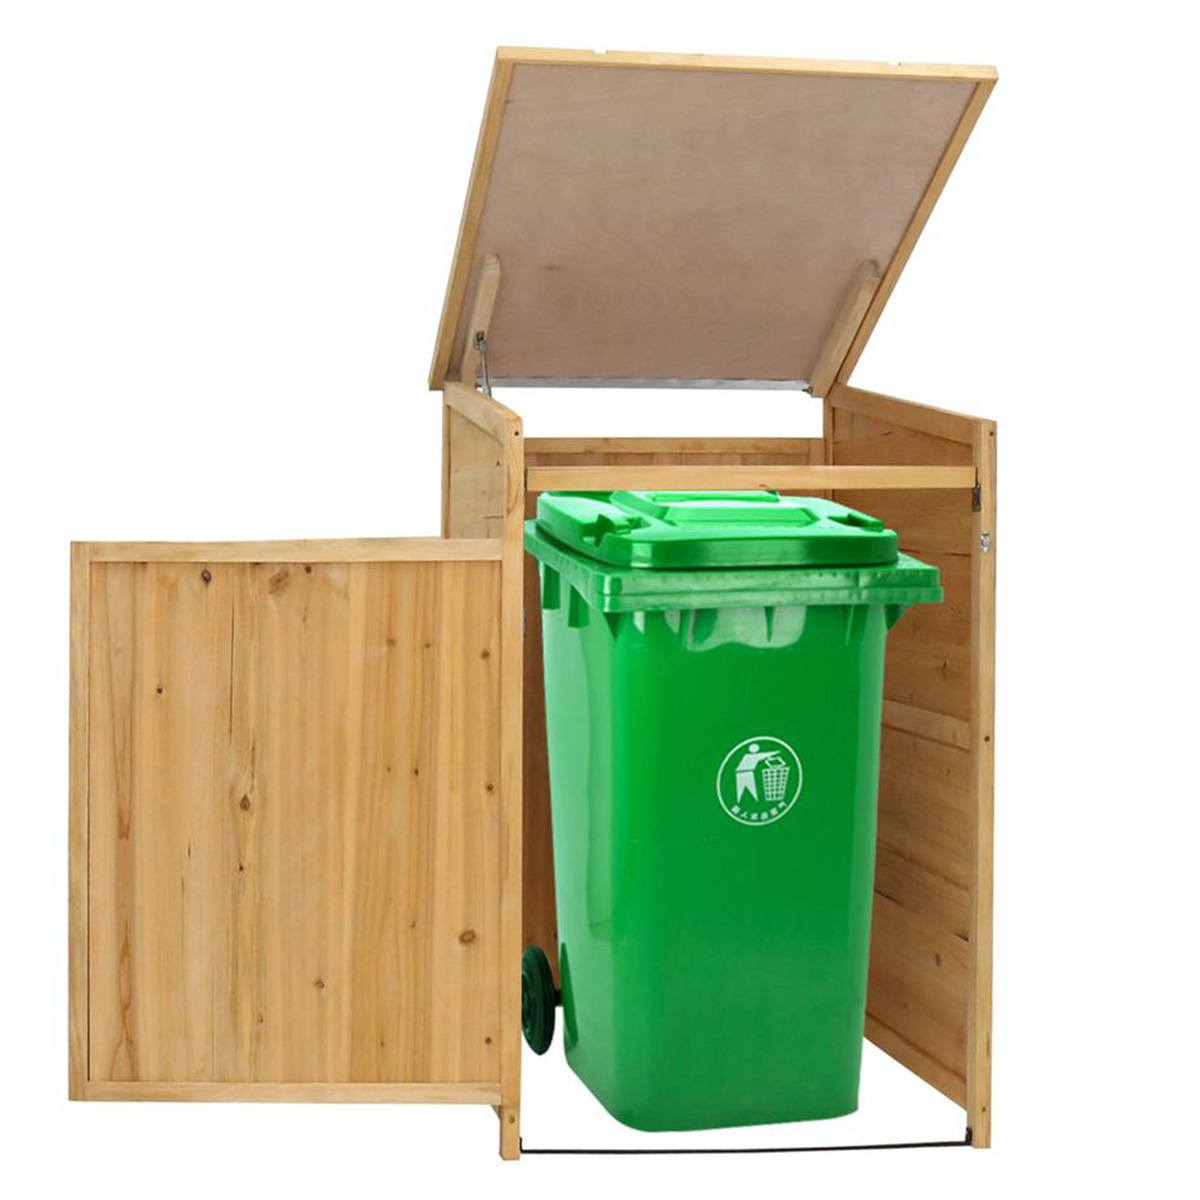 9 Ways To Disguise Your Trash Bin, Wooden Garbage Can Storage Shed